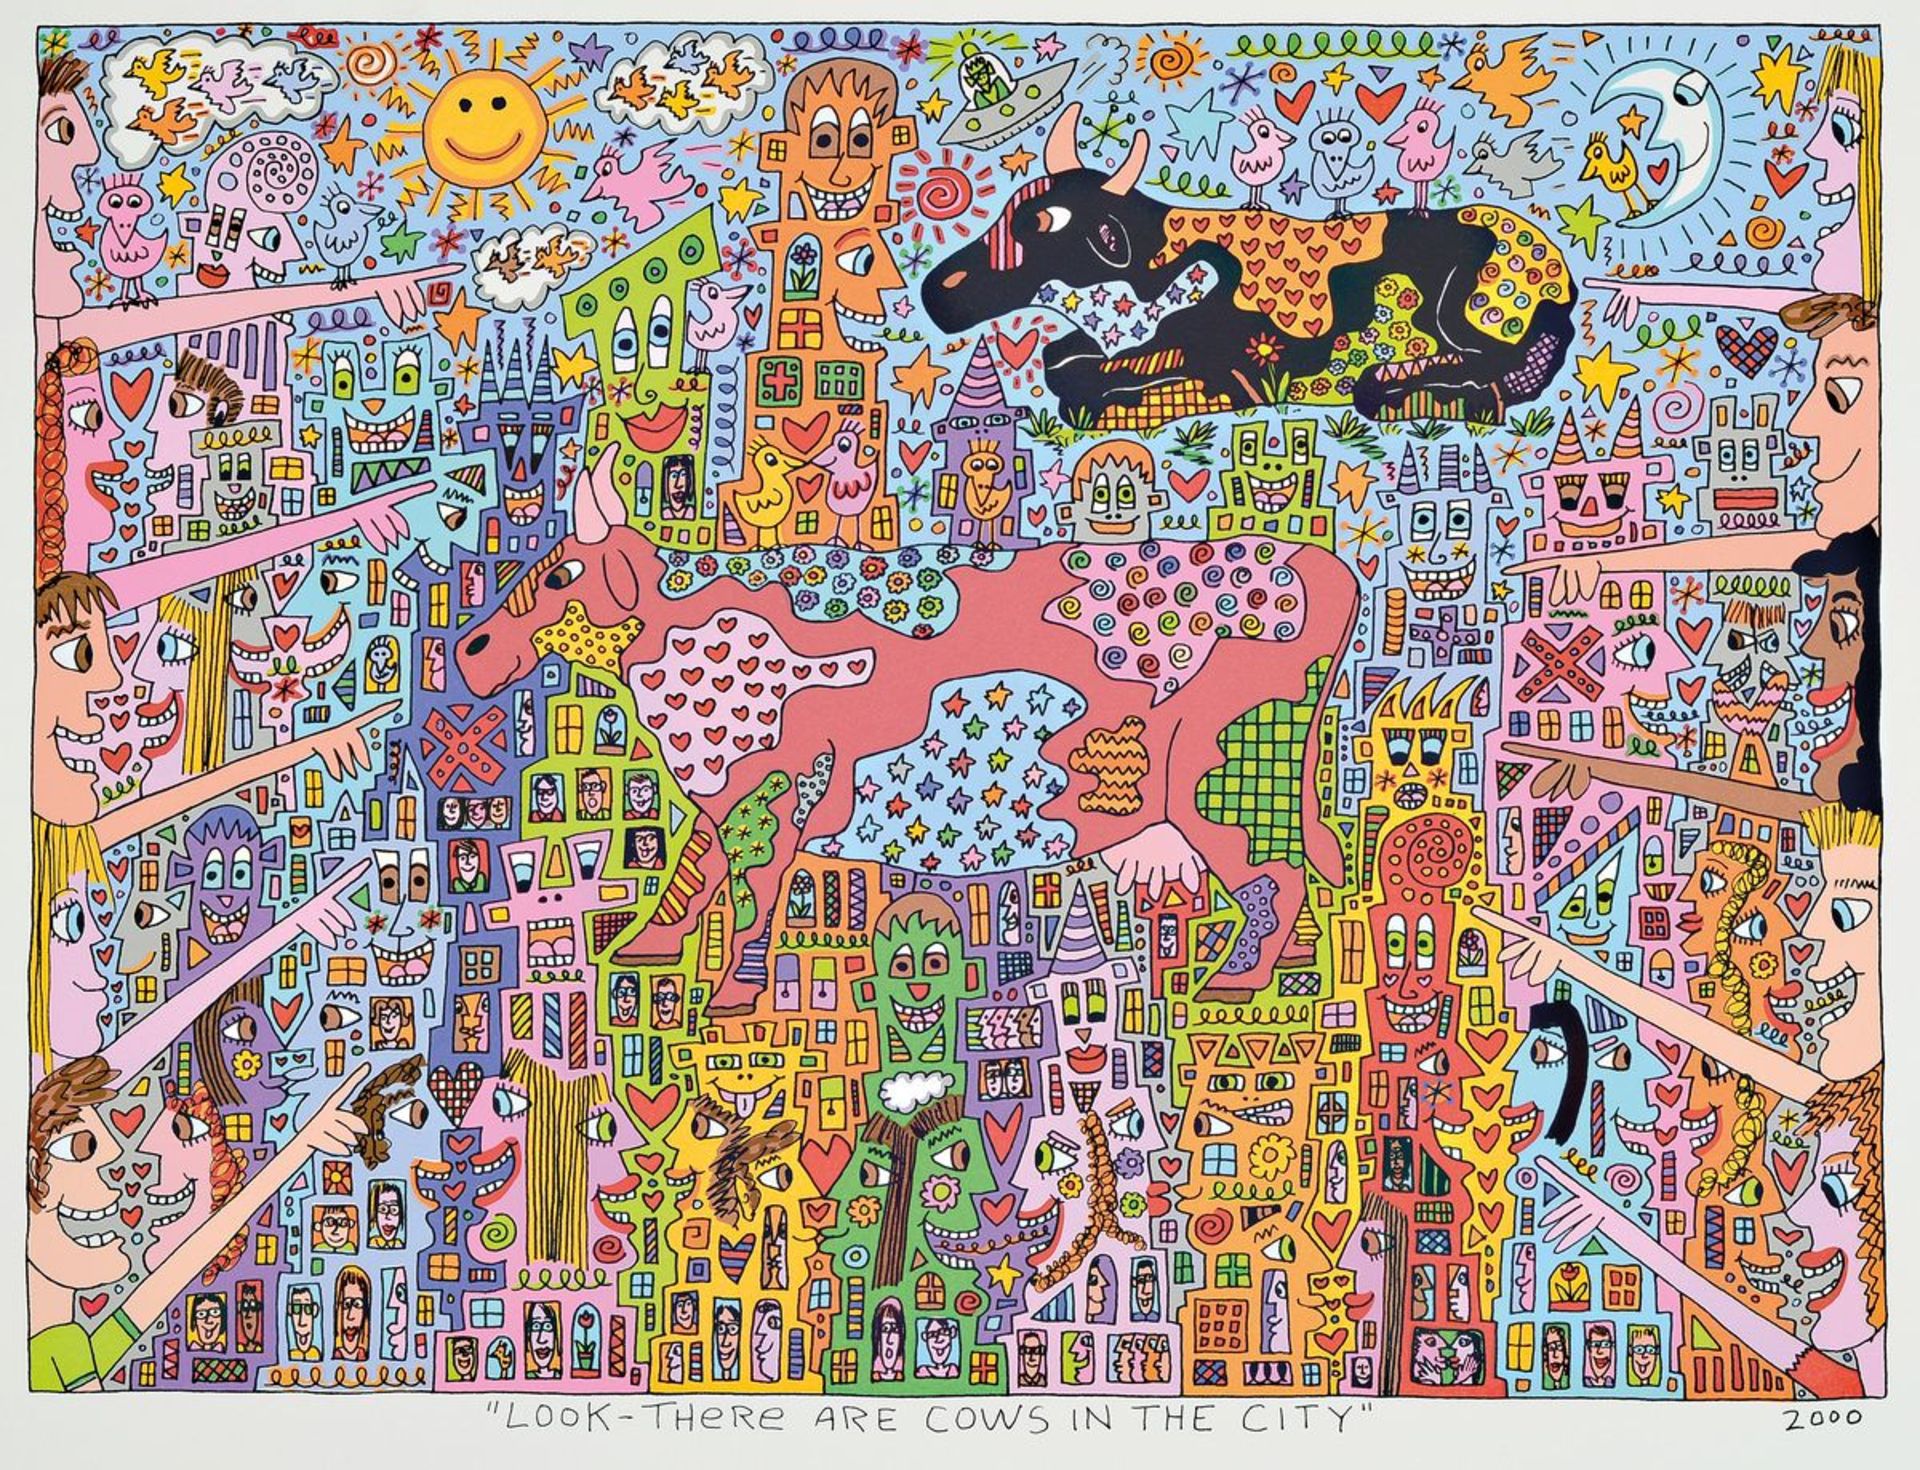 James Rizzi, 1950-2011, "Look there are cows in the city", Farblithografie, dat. 2000, Motiv ca.